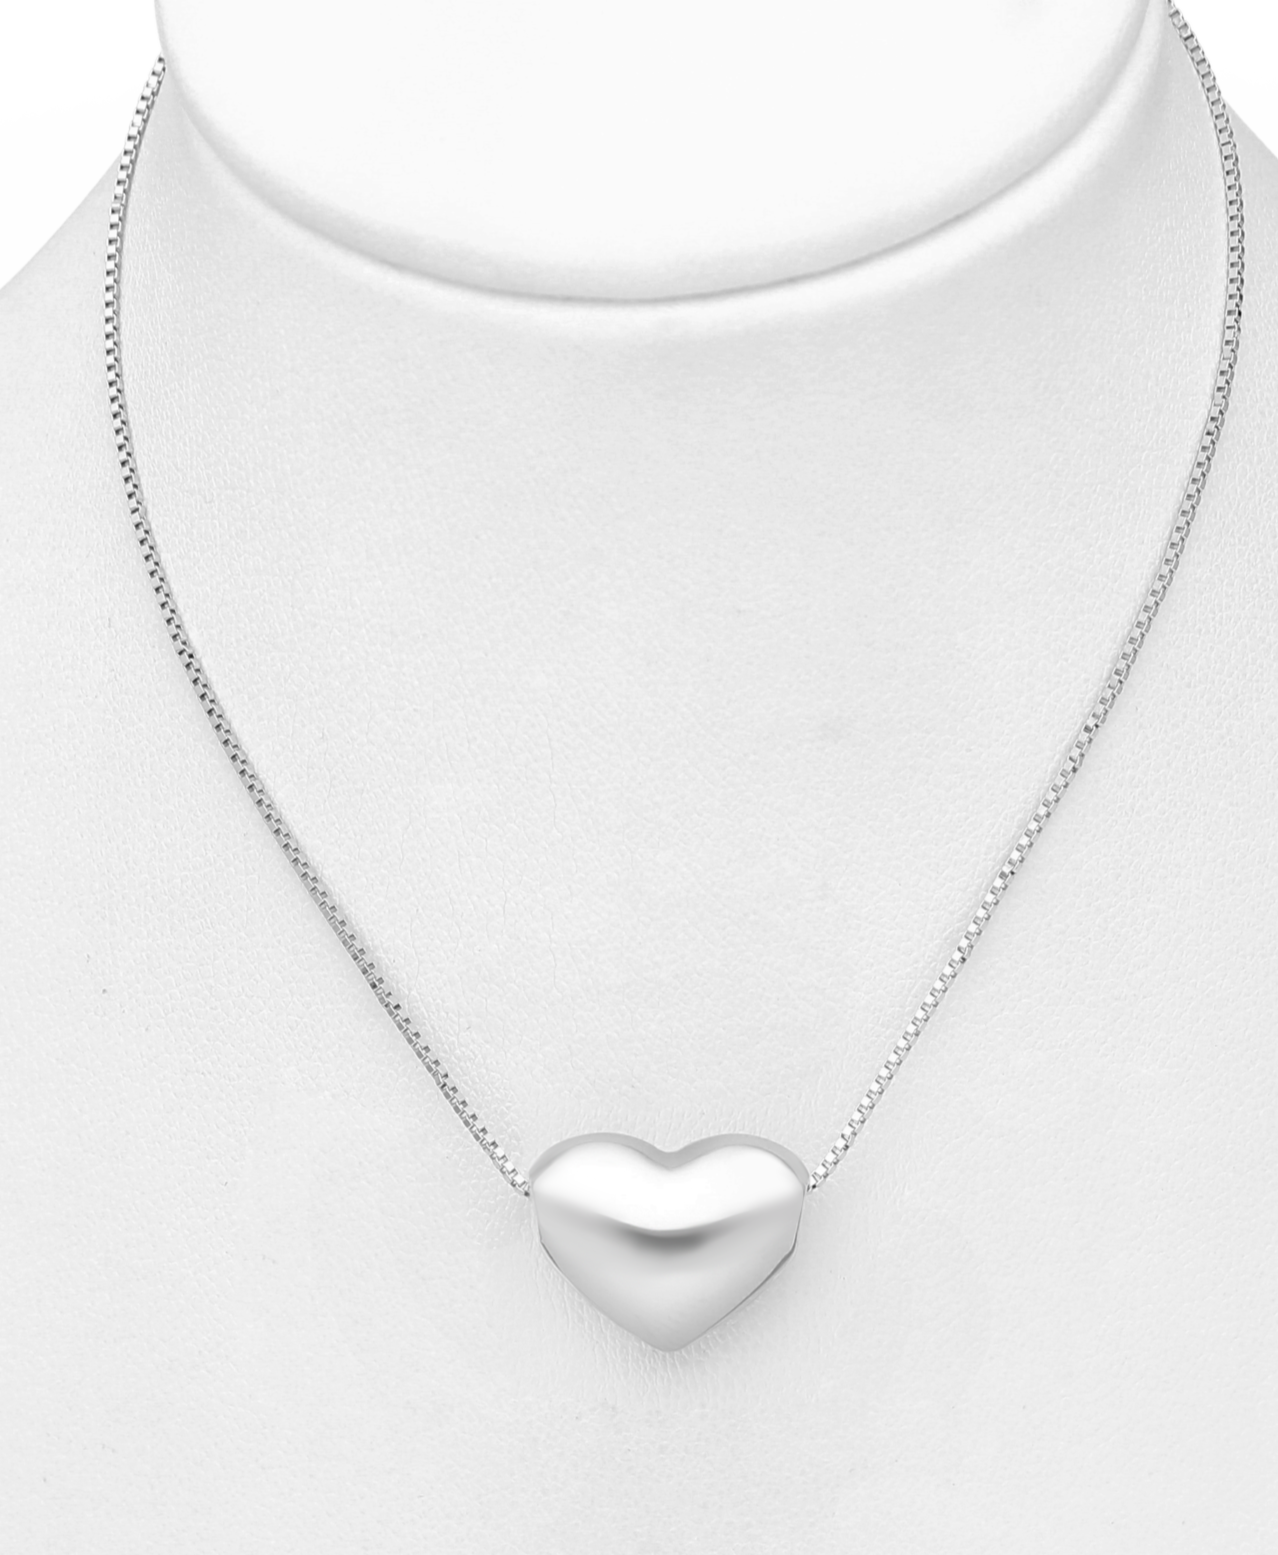 Sterling Silver Heart Necklace with Extender